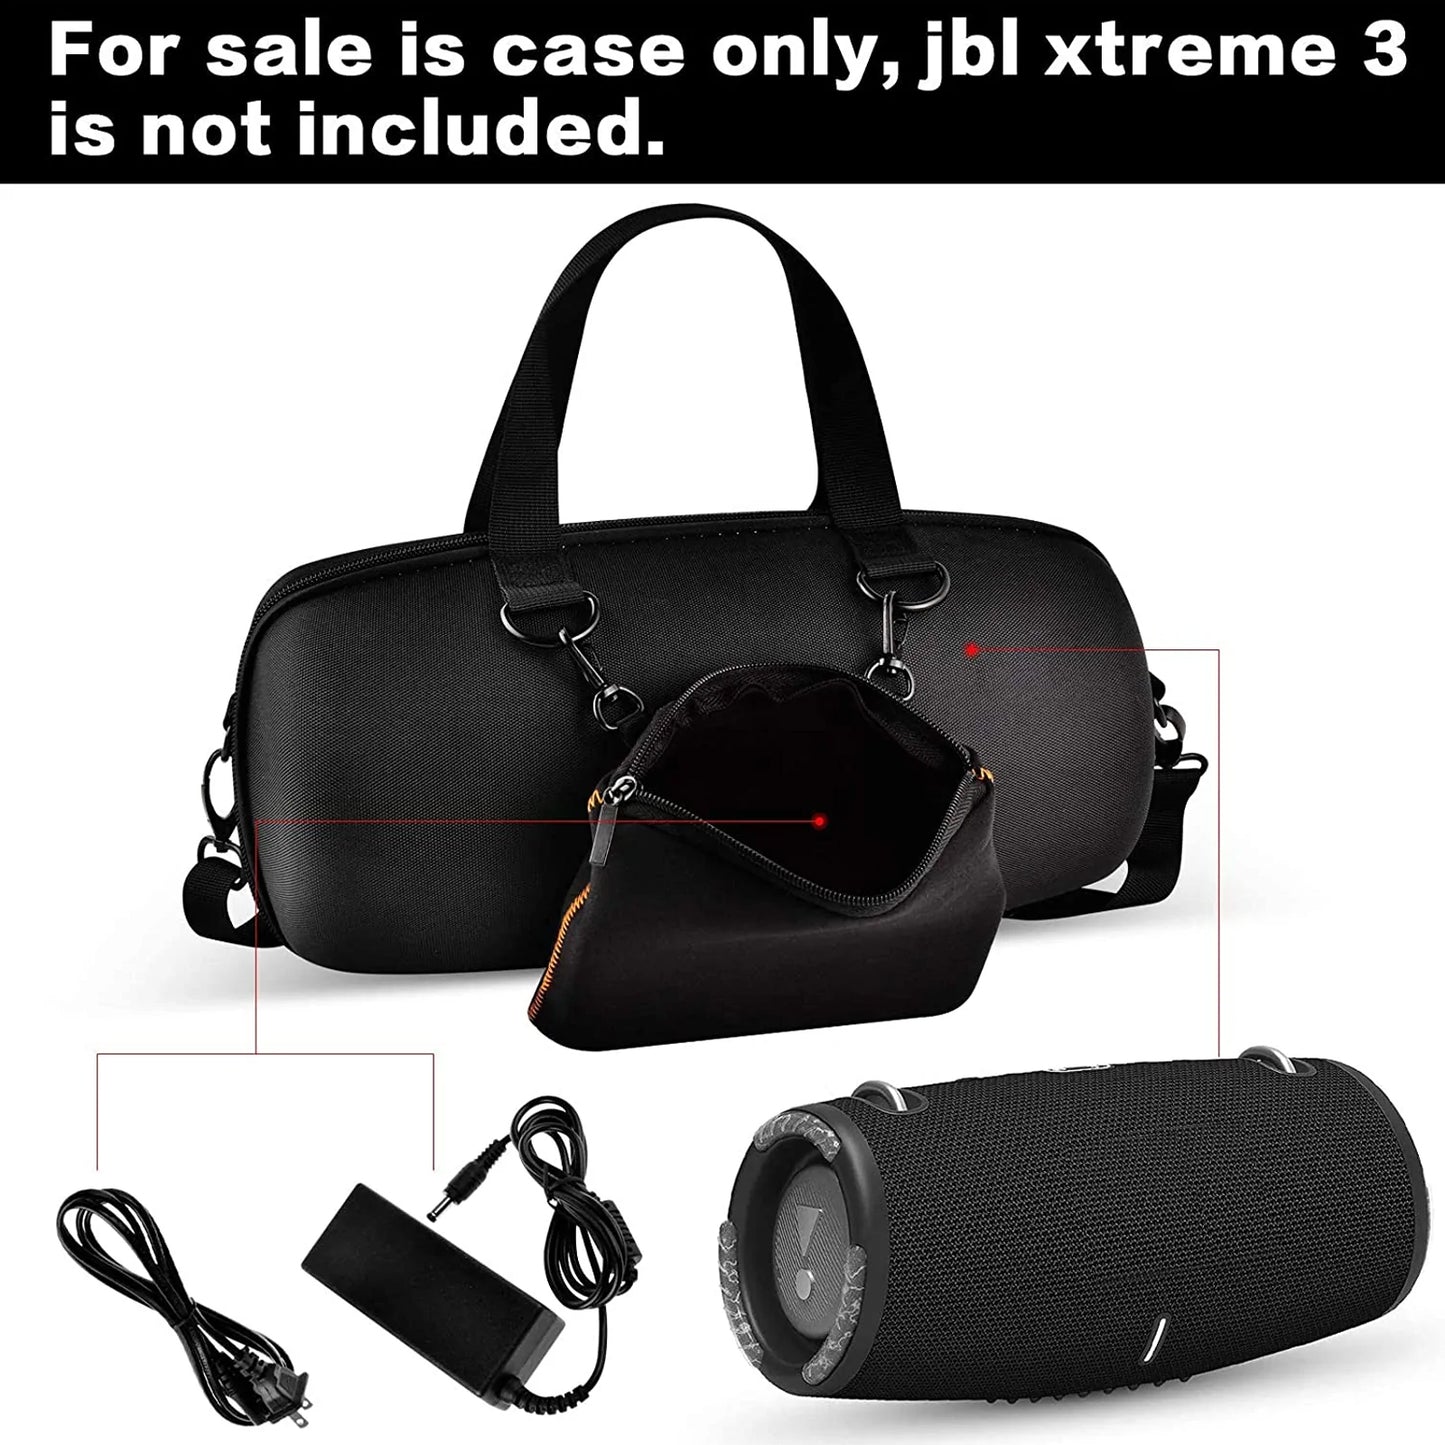 Hard Case for JBL Xtreme 3/ for Extreme 2 Waterproof Portable Bluetooth Speaker, Black Hard Travel Carrying Box for JBL Xtreme Lifestyle Accessories, USB Cable & Charger, Bag Only